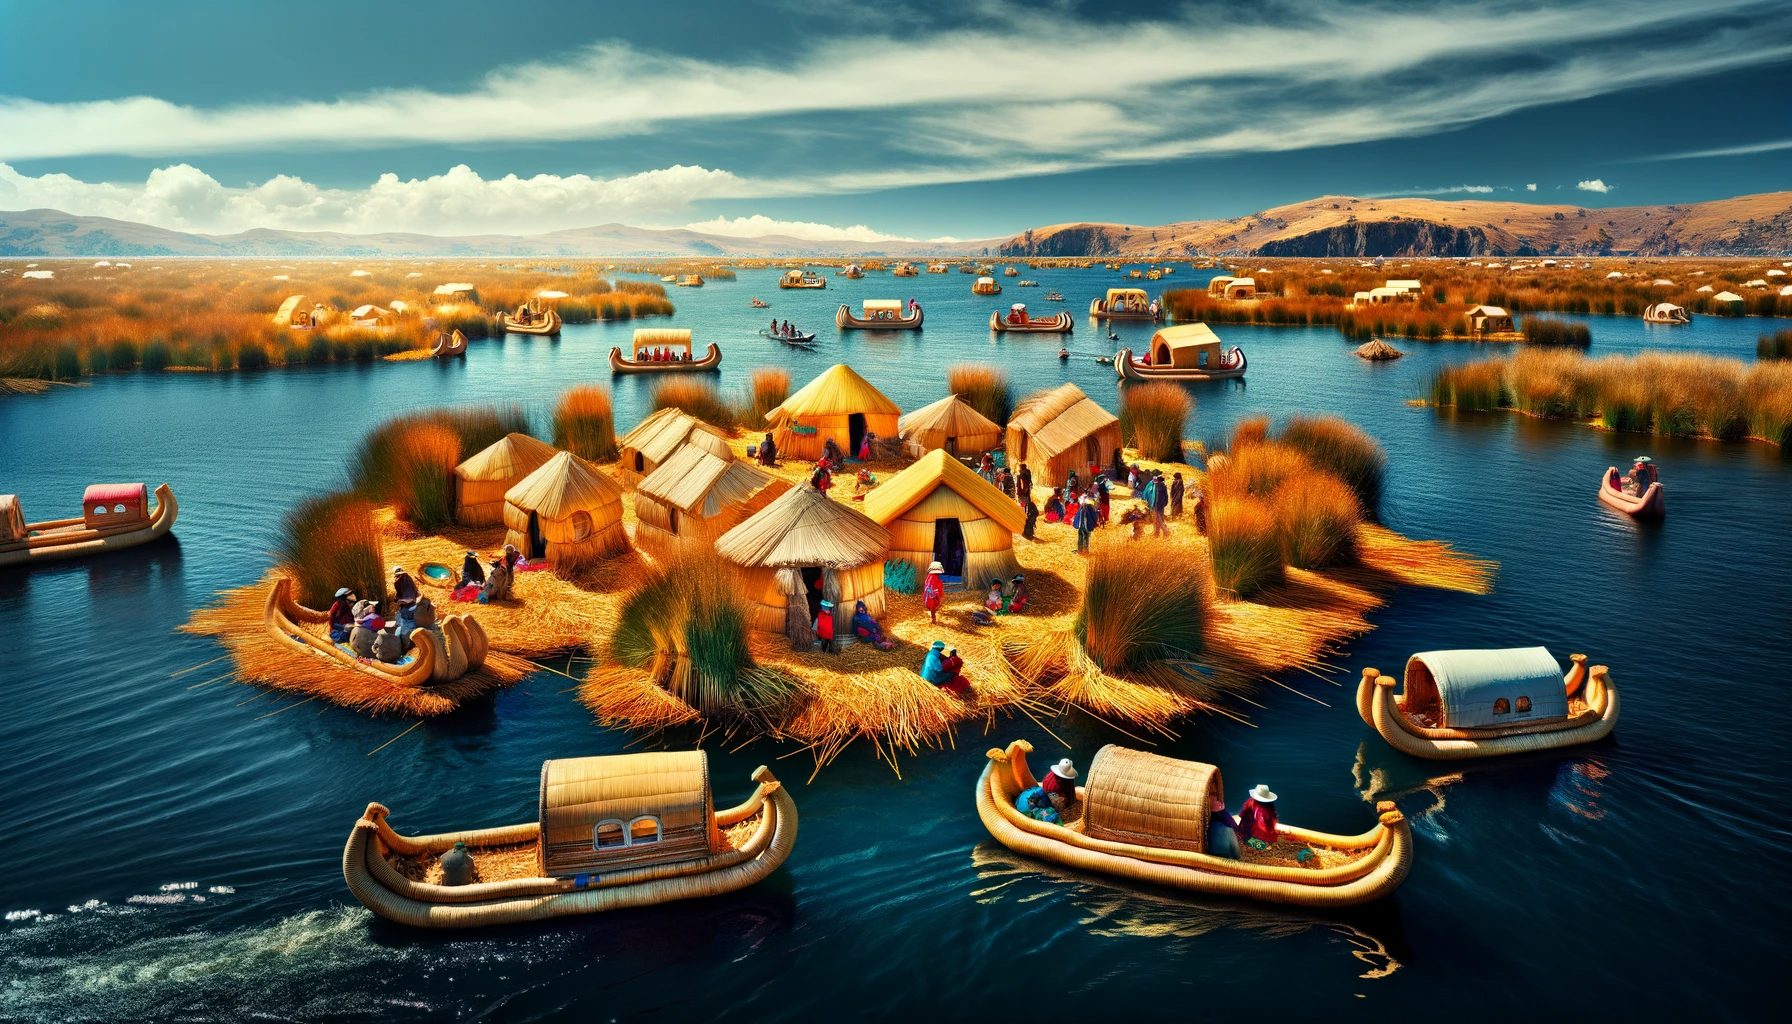 Uros floating islands on Lake Titicaca with traditional boats.